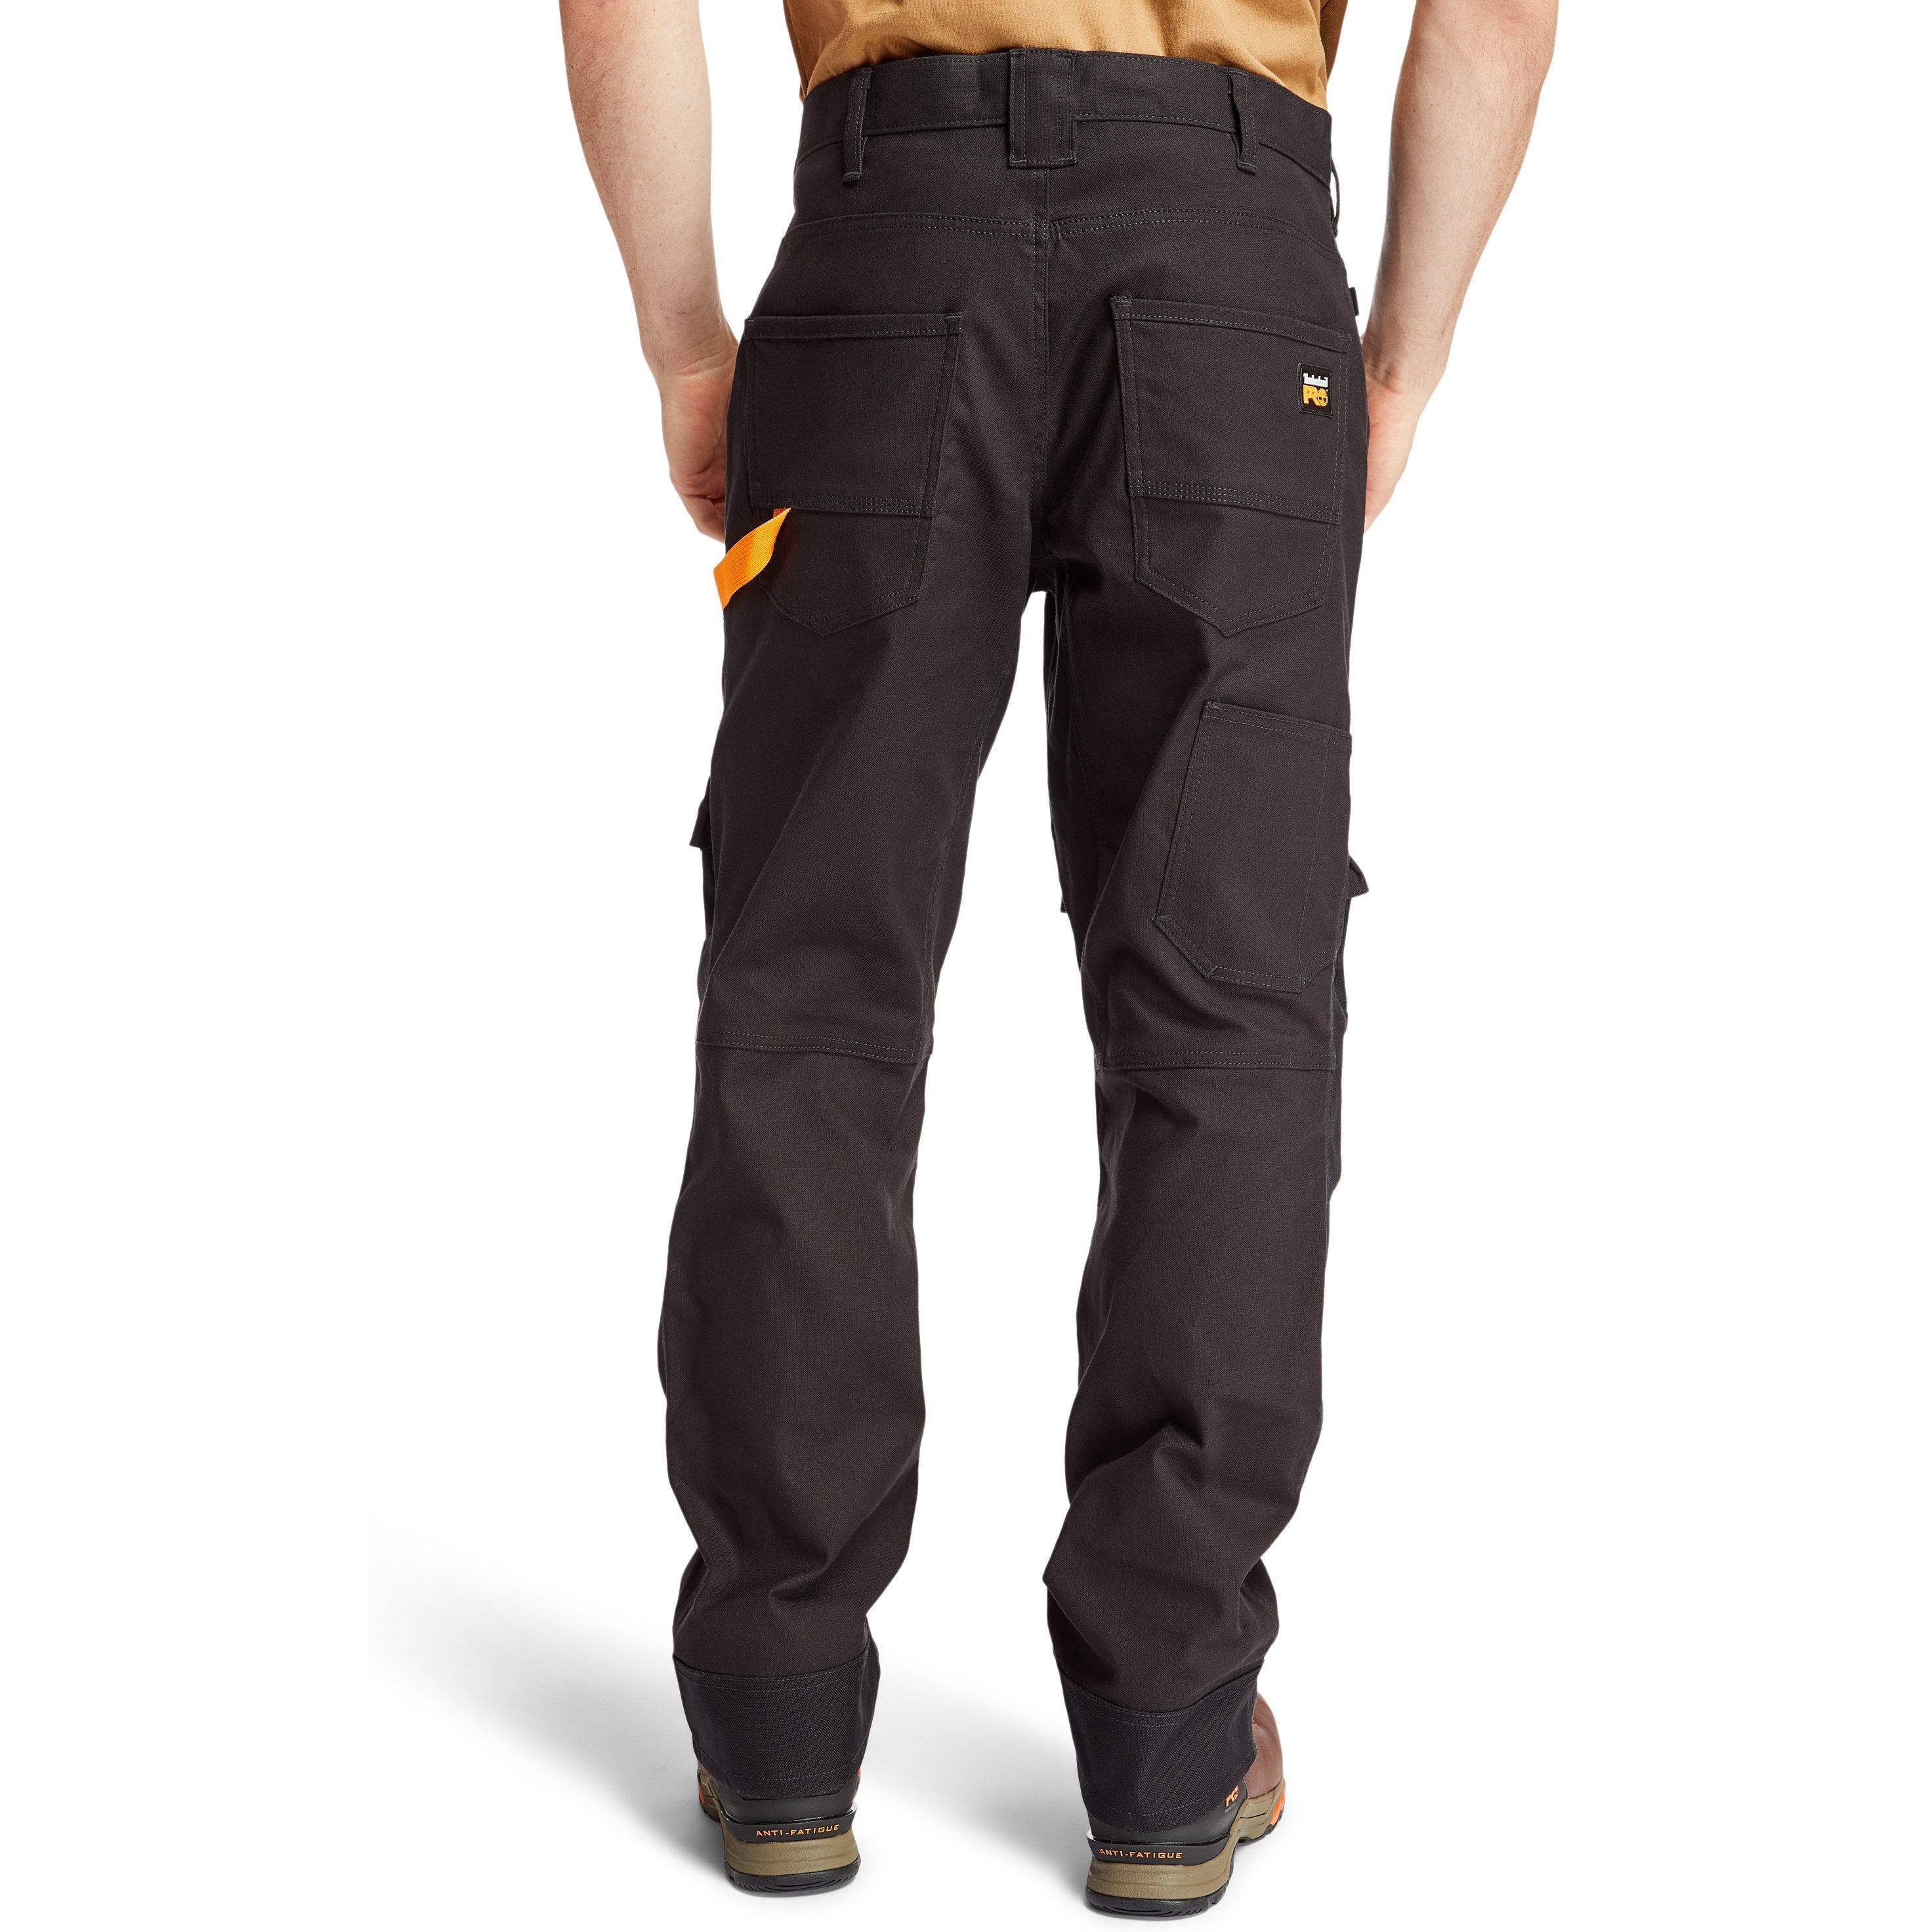 Timberland Pro Men's Gridflex Knee Pad Work Pant - Black- TB0A1OVC015  - Overlook Boots